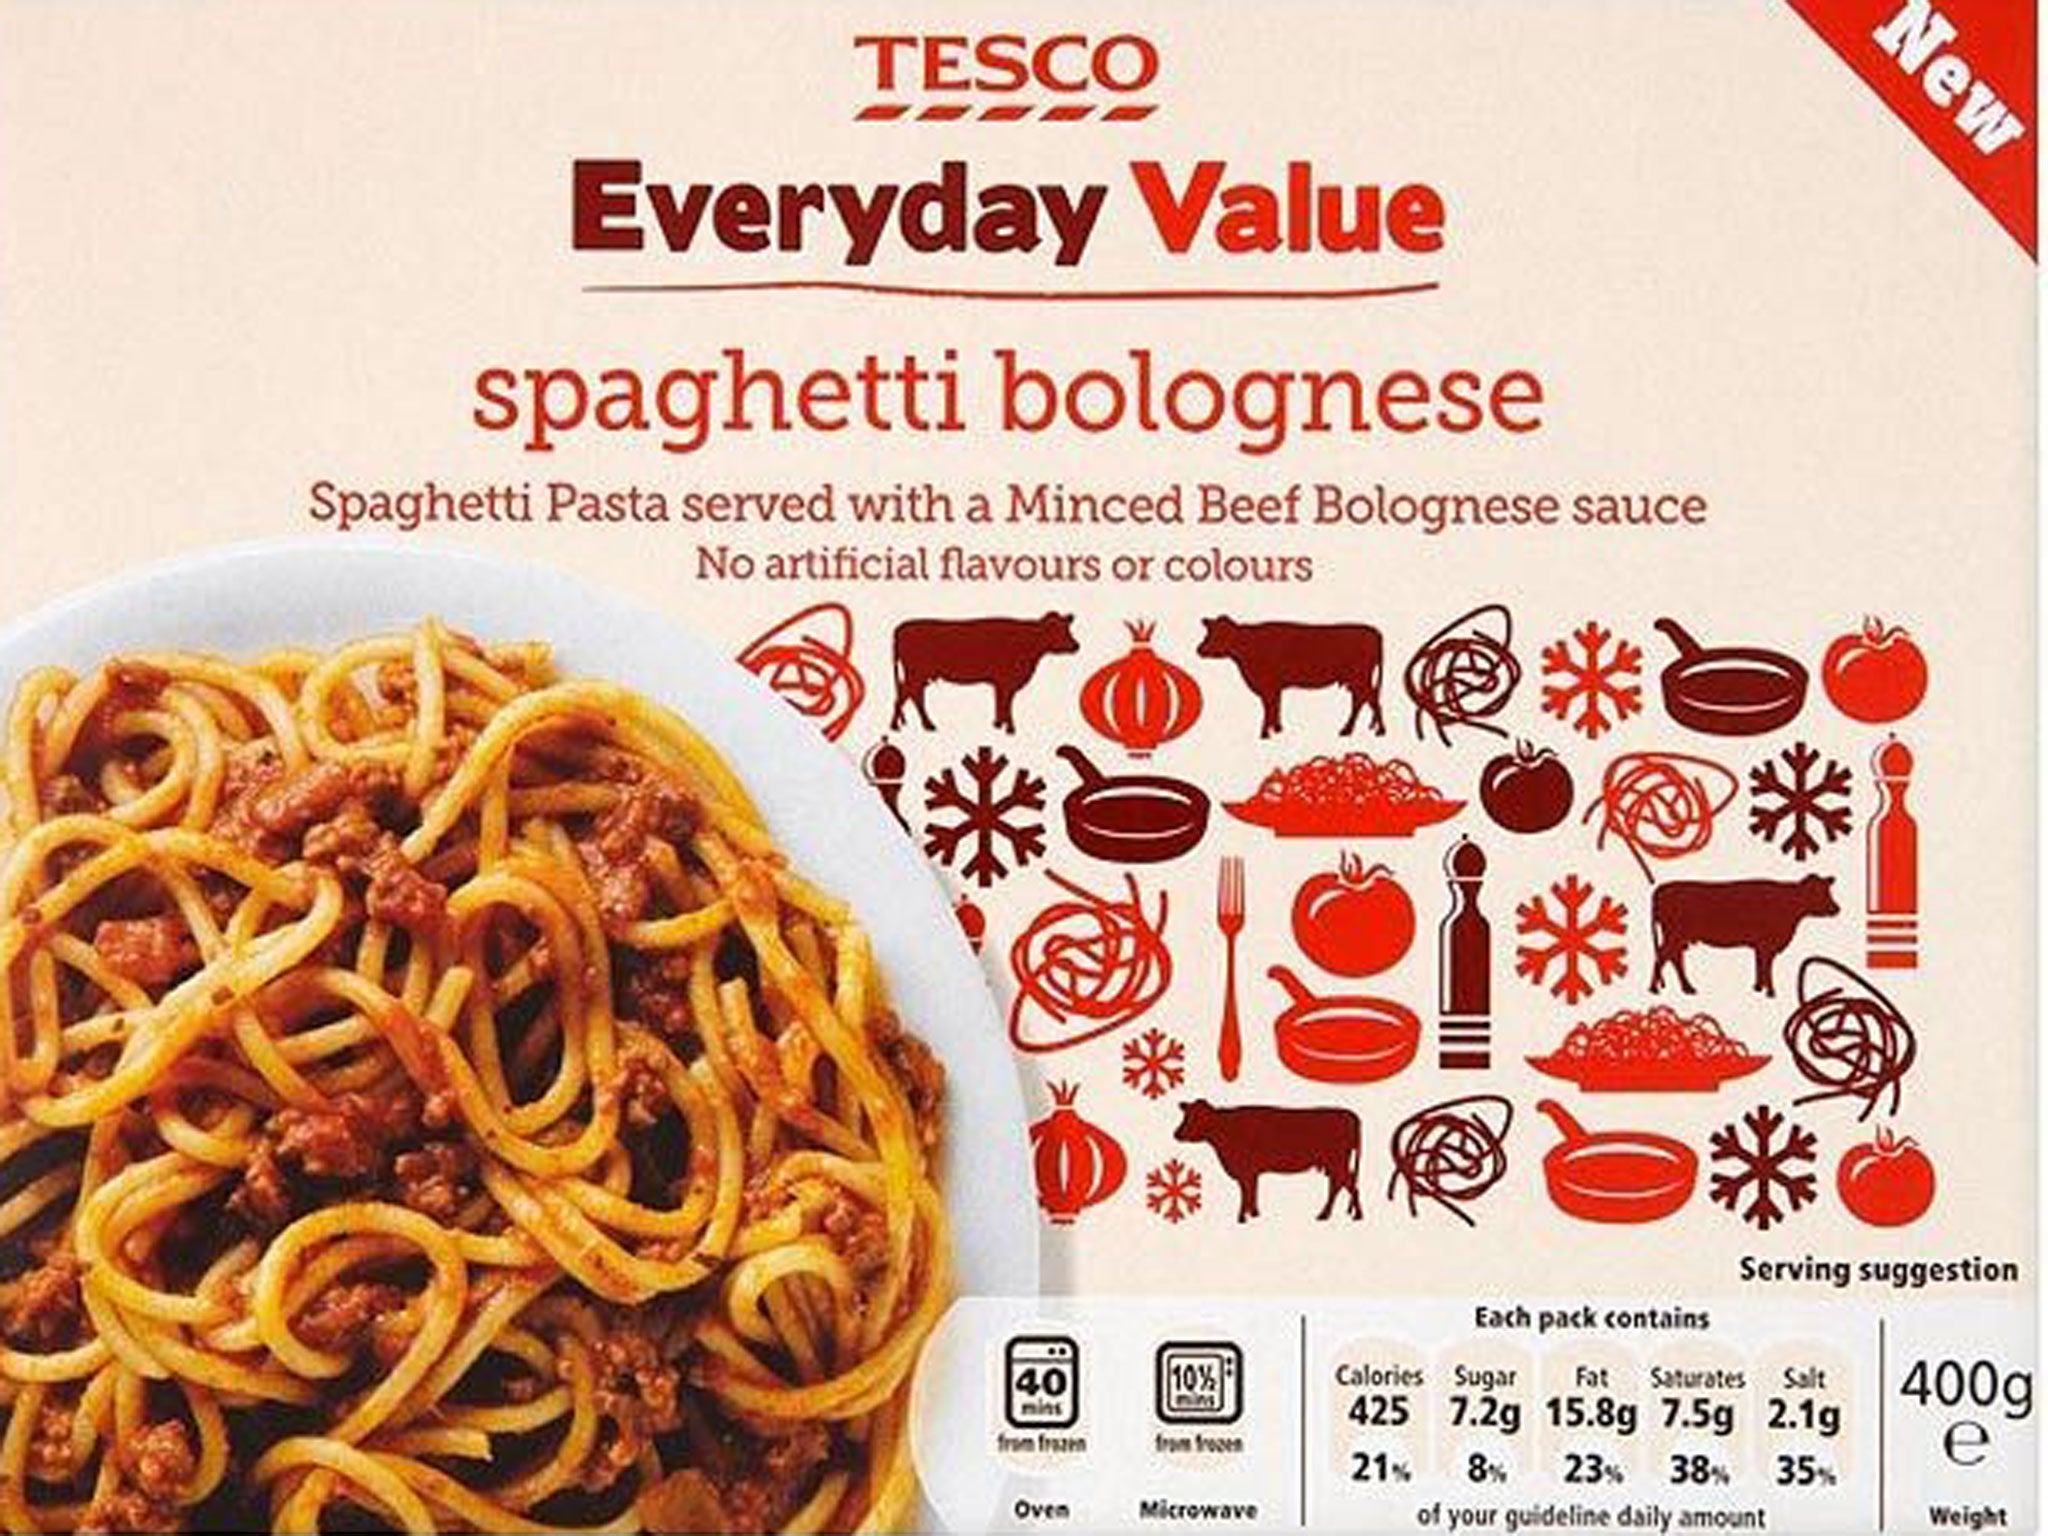 Tesco admitted its Every Day Value Spaghetti Bolognese contained horse meat